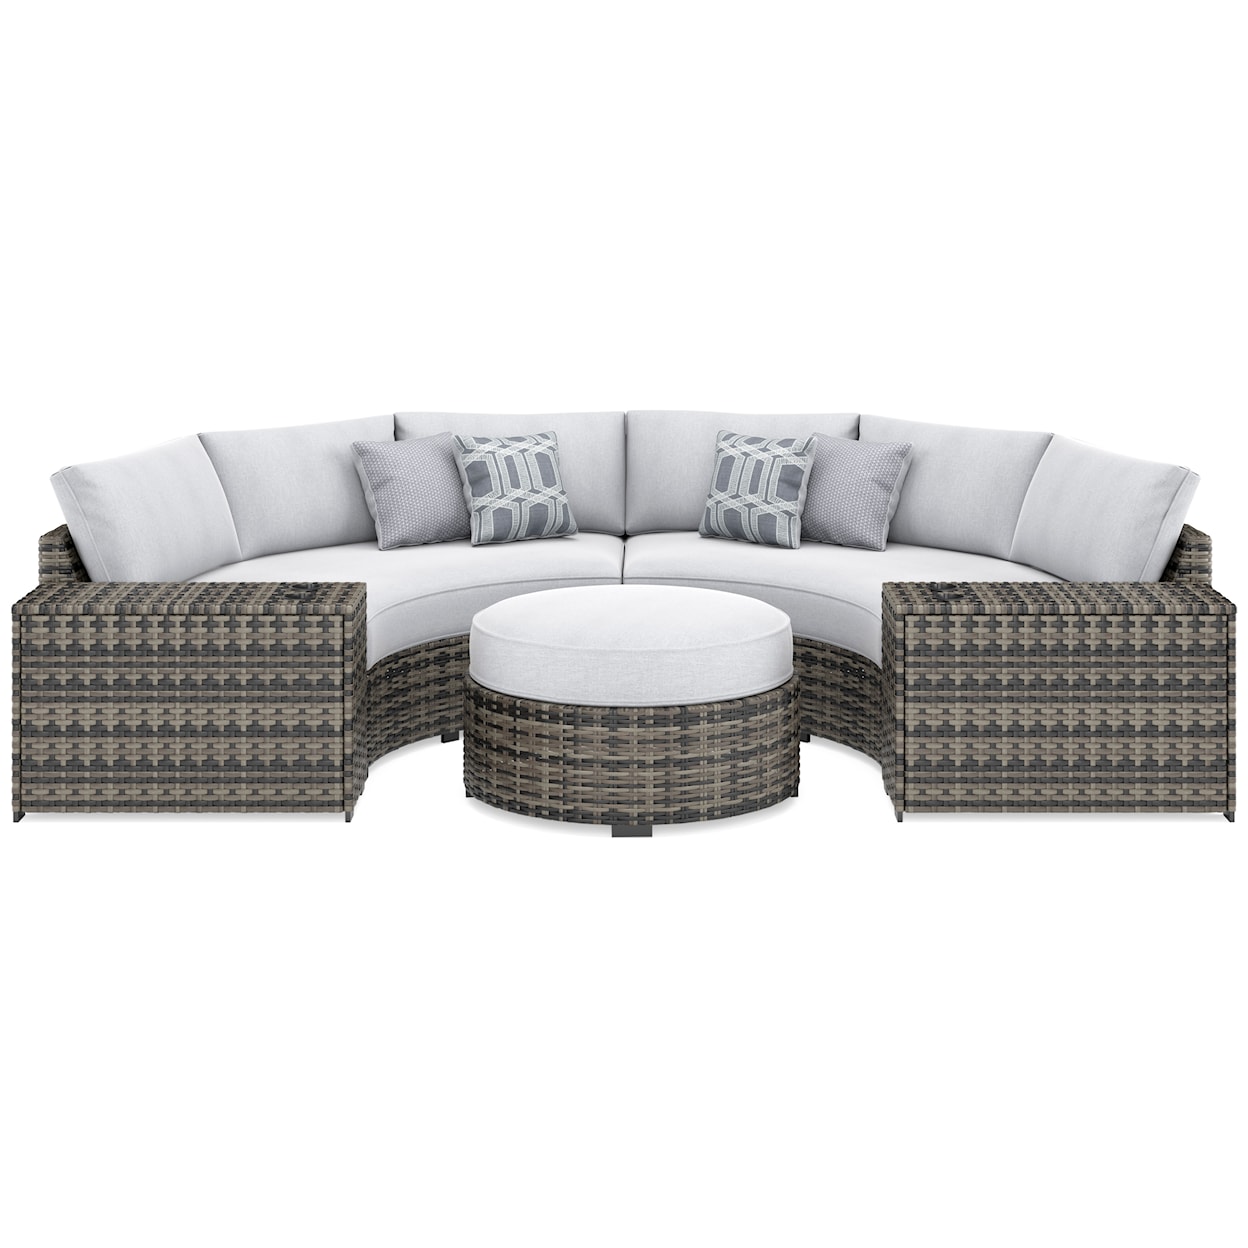 Benchcraft Harbor Court 4-Piece Outdoor Sectional